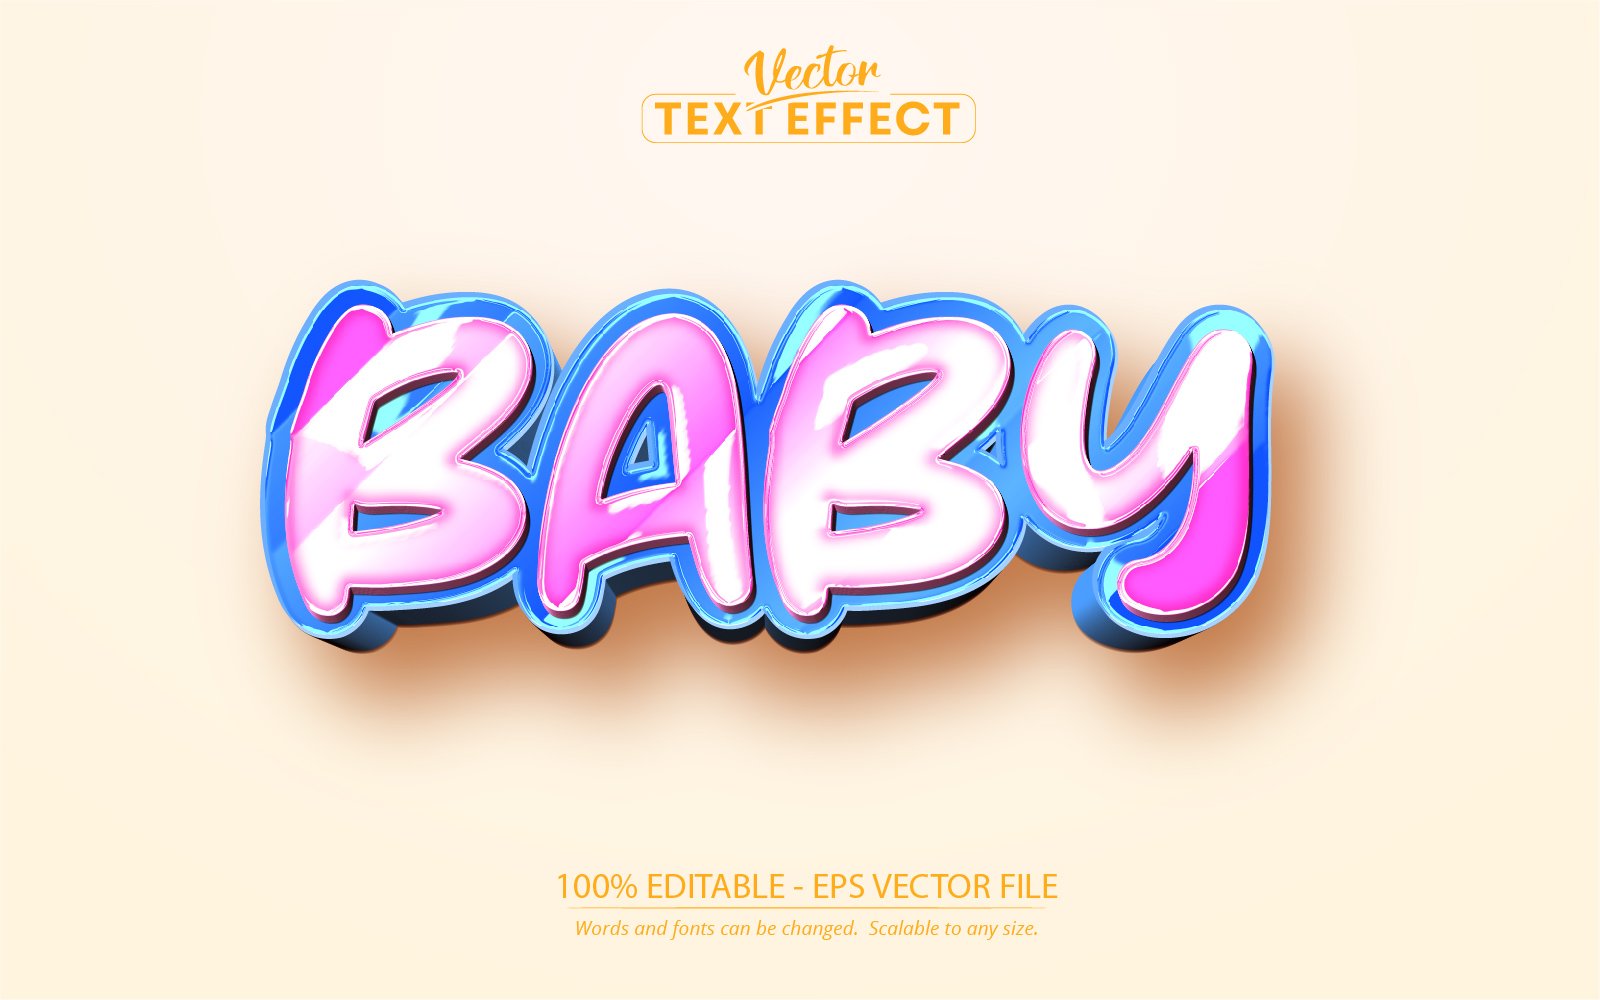 Baby - Editable Text Effect, Blue And Pink Cartoon Text Style, Graphics Illustration